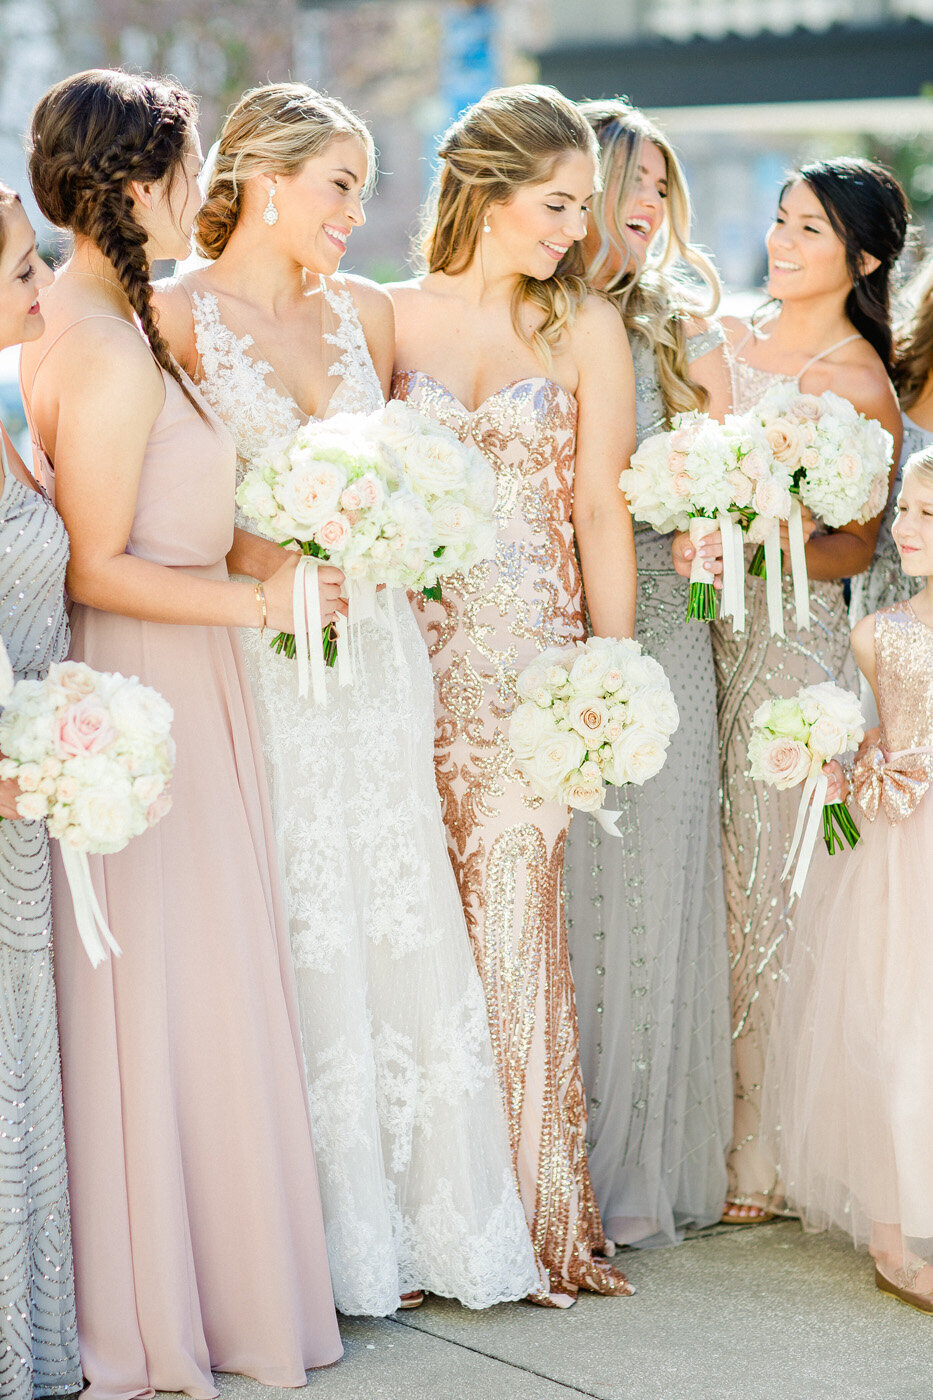 Armature Works Wedding @ Ailyn La Torre Photography 2019 18352